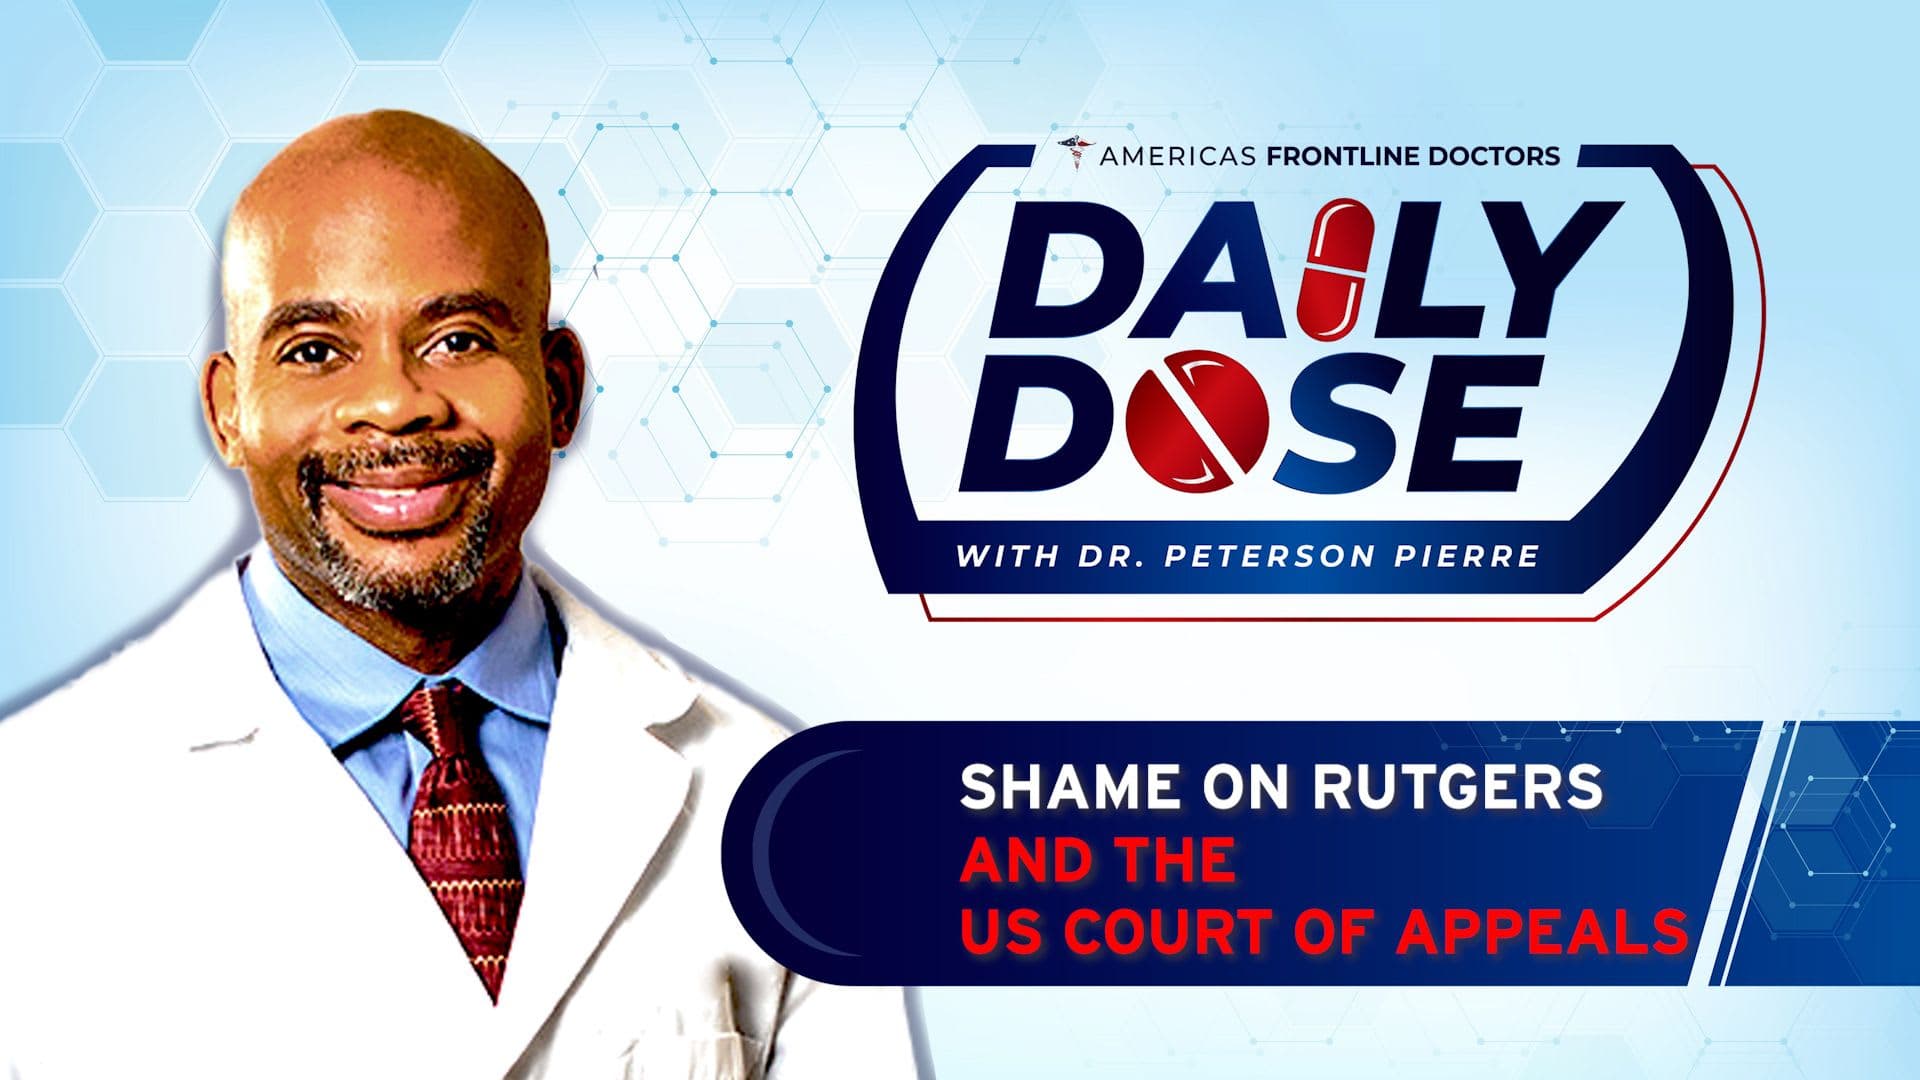 Daily Dose: 'Shame on Rutgers & the US Court of Appeals' with Dr. Peterson Pierre